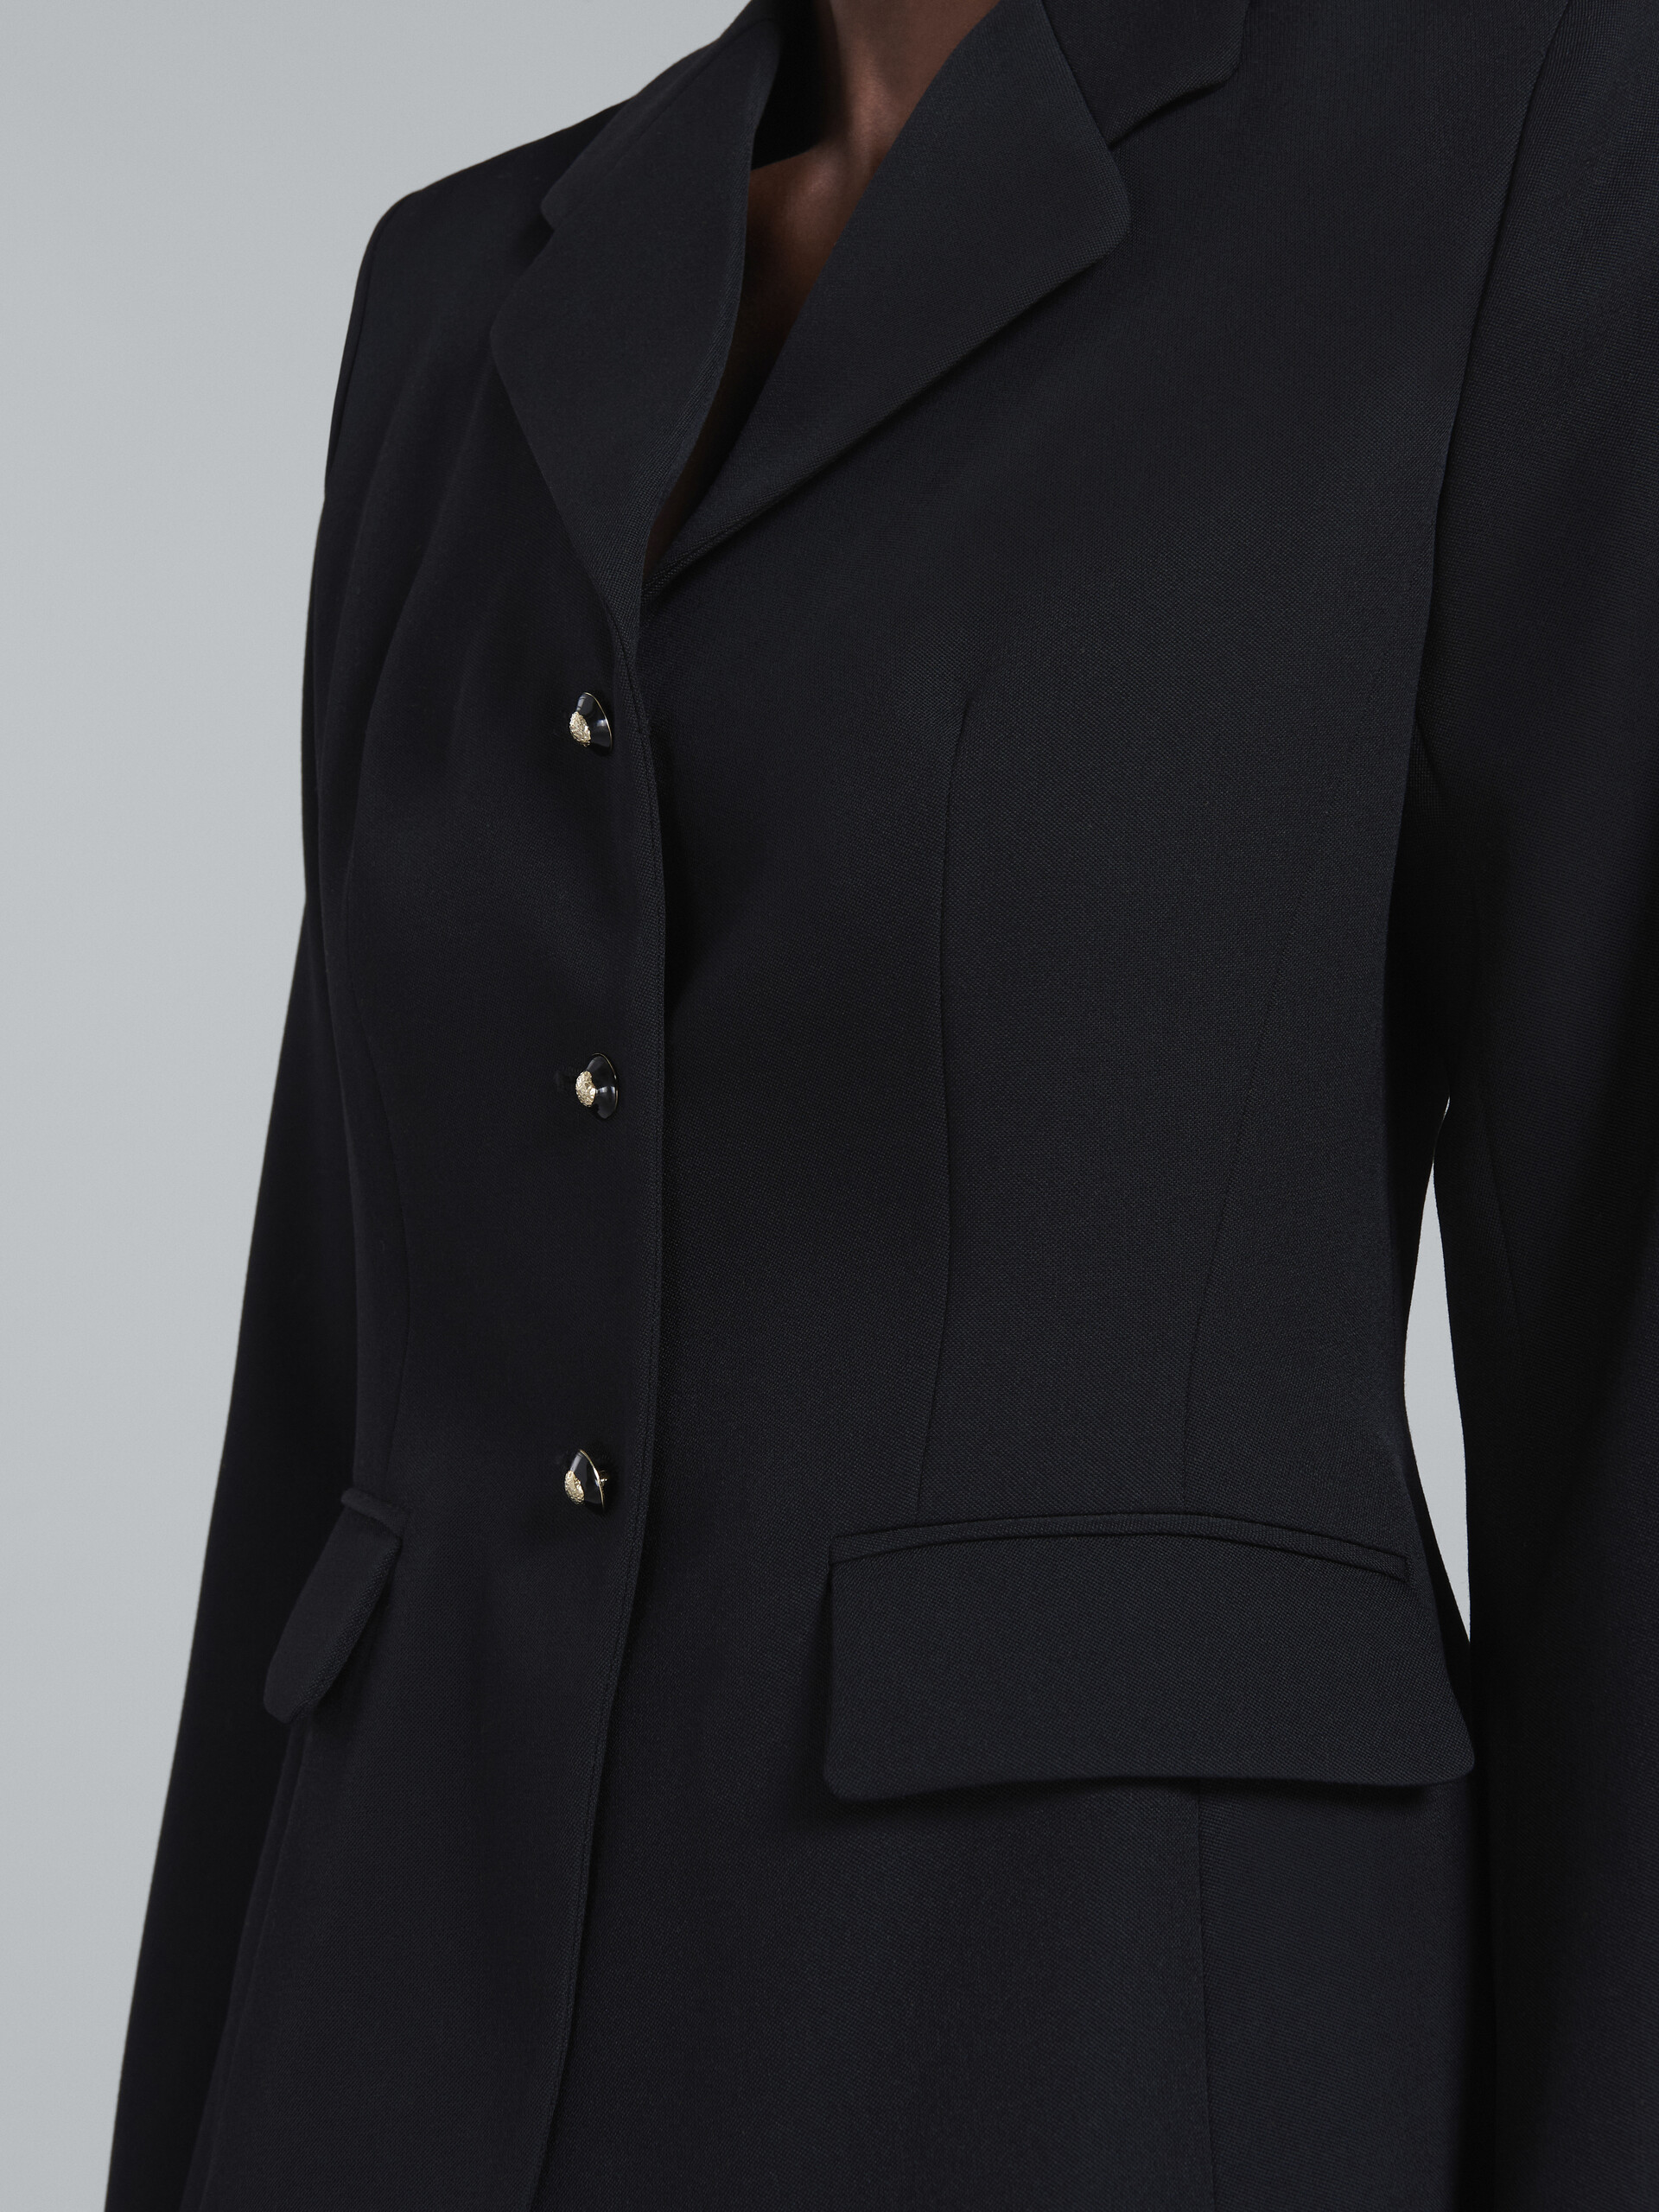 Black fitted wool blazer - Jackets - Image 5